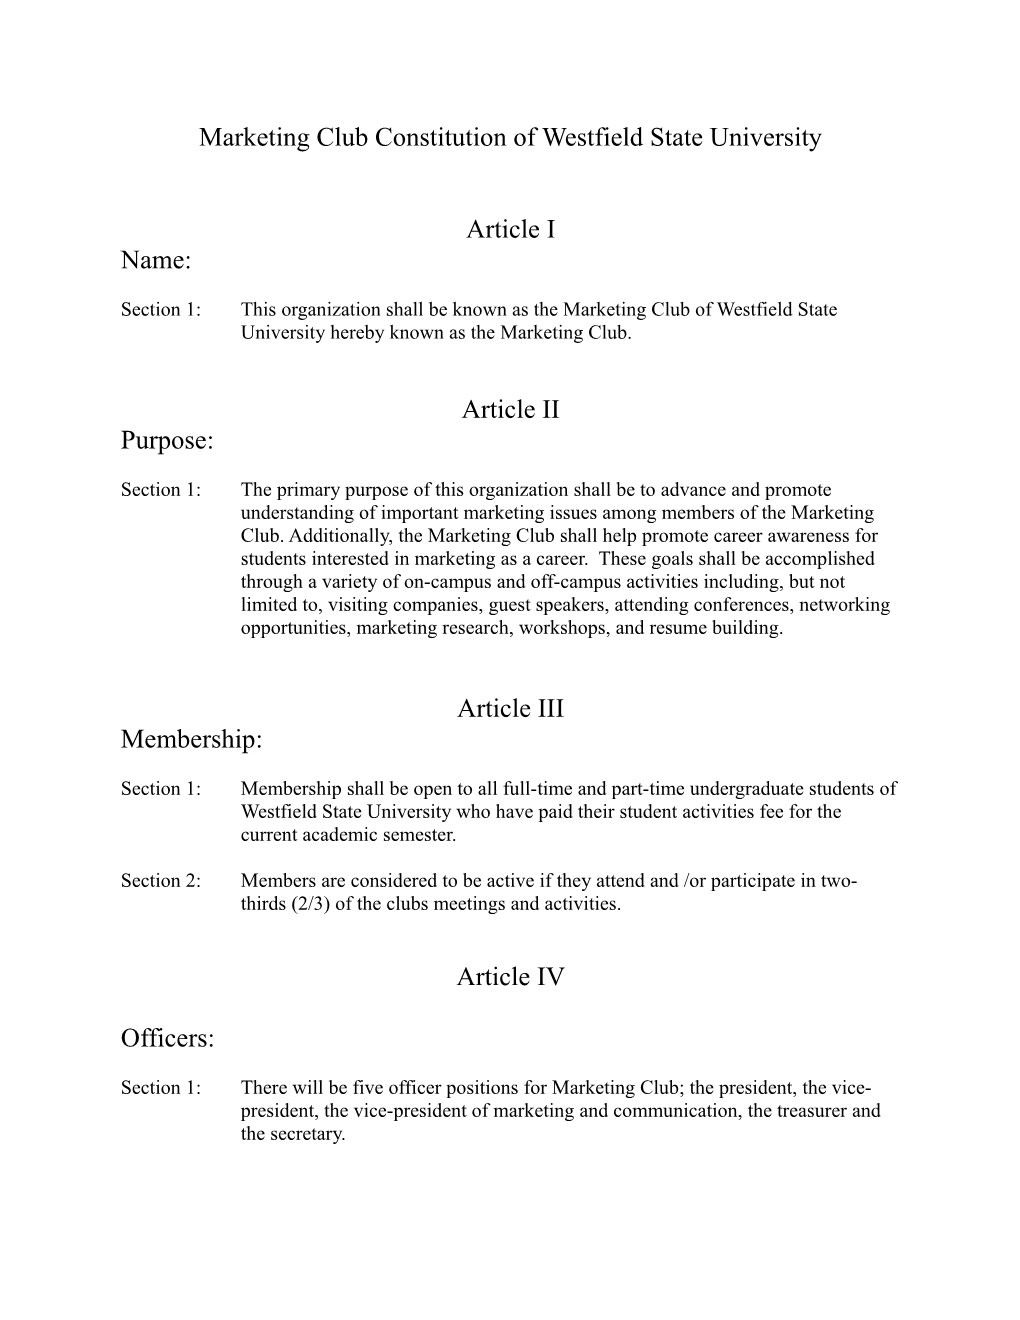 Marketing Club Constitution of Westfield State University